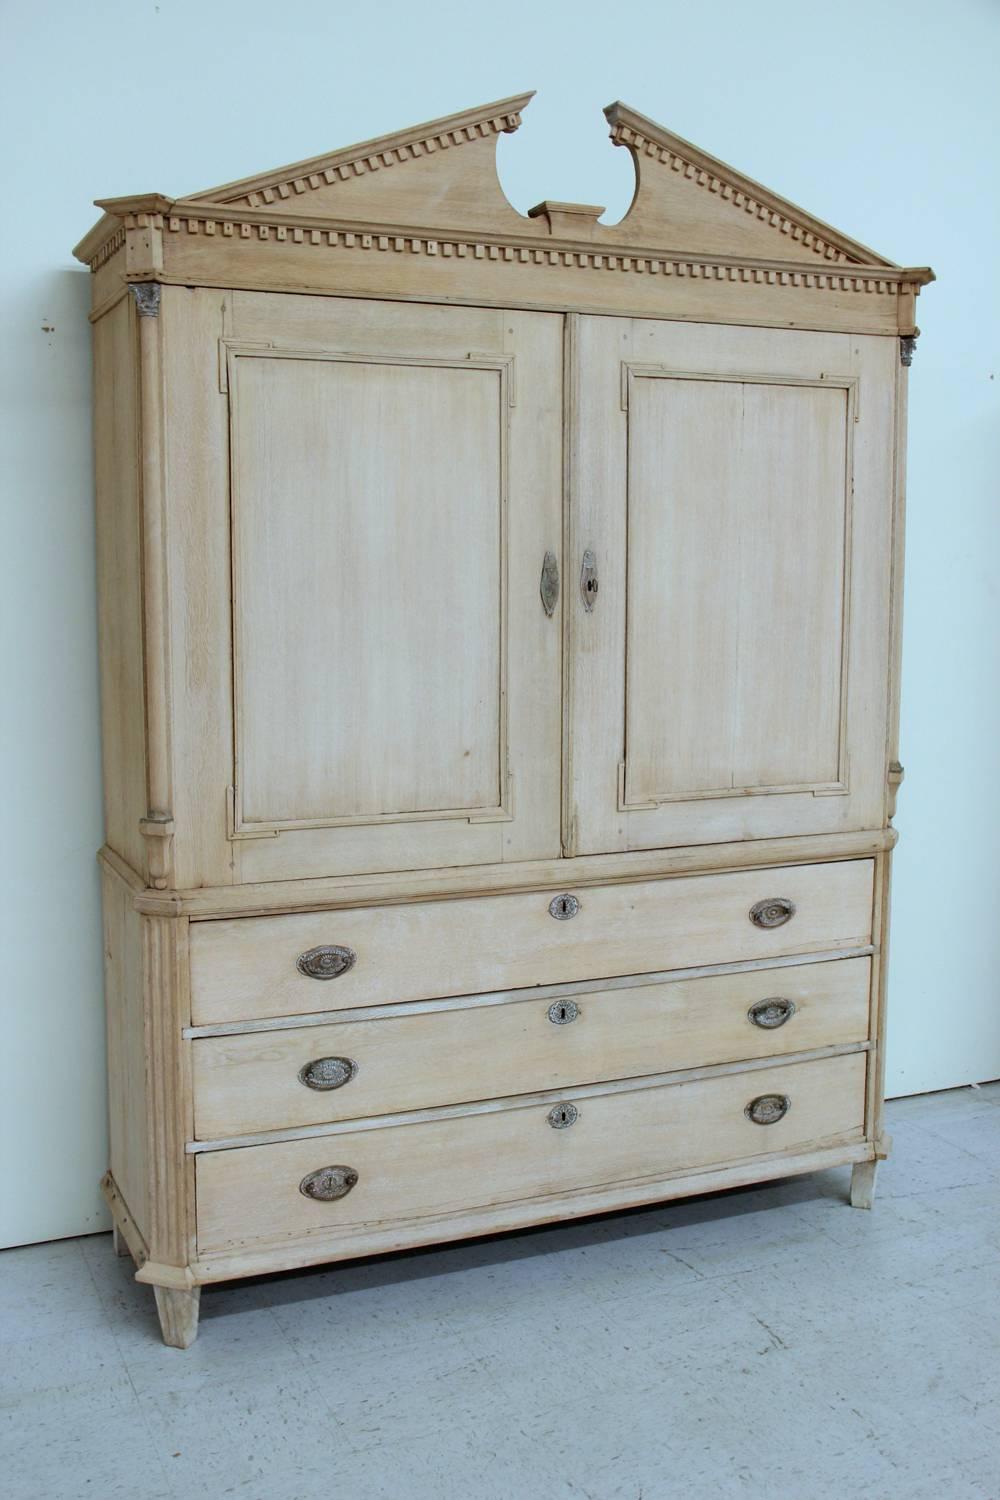 19th century Dutch neoclassical, two-part armoire in bleached oak with brass hardware and three large lower drawers. This cabinet has a pediment framed by dentil molding and half-round columns with original brass mounts. The grey painted interior